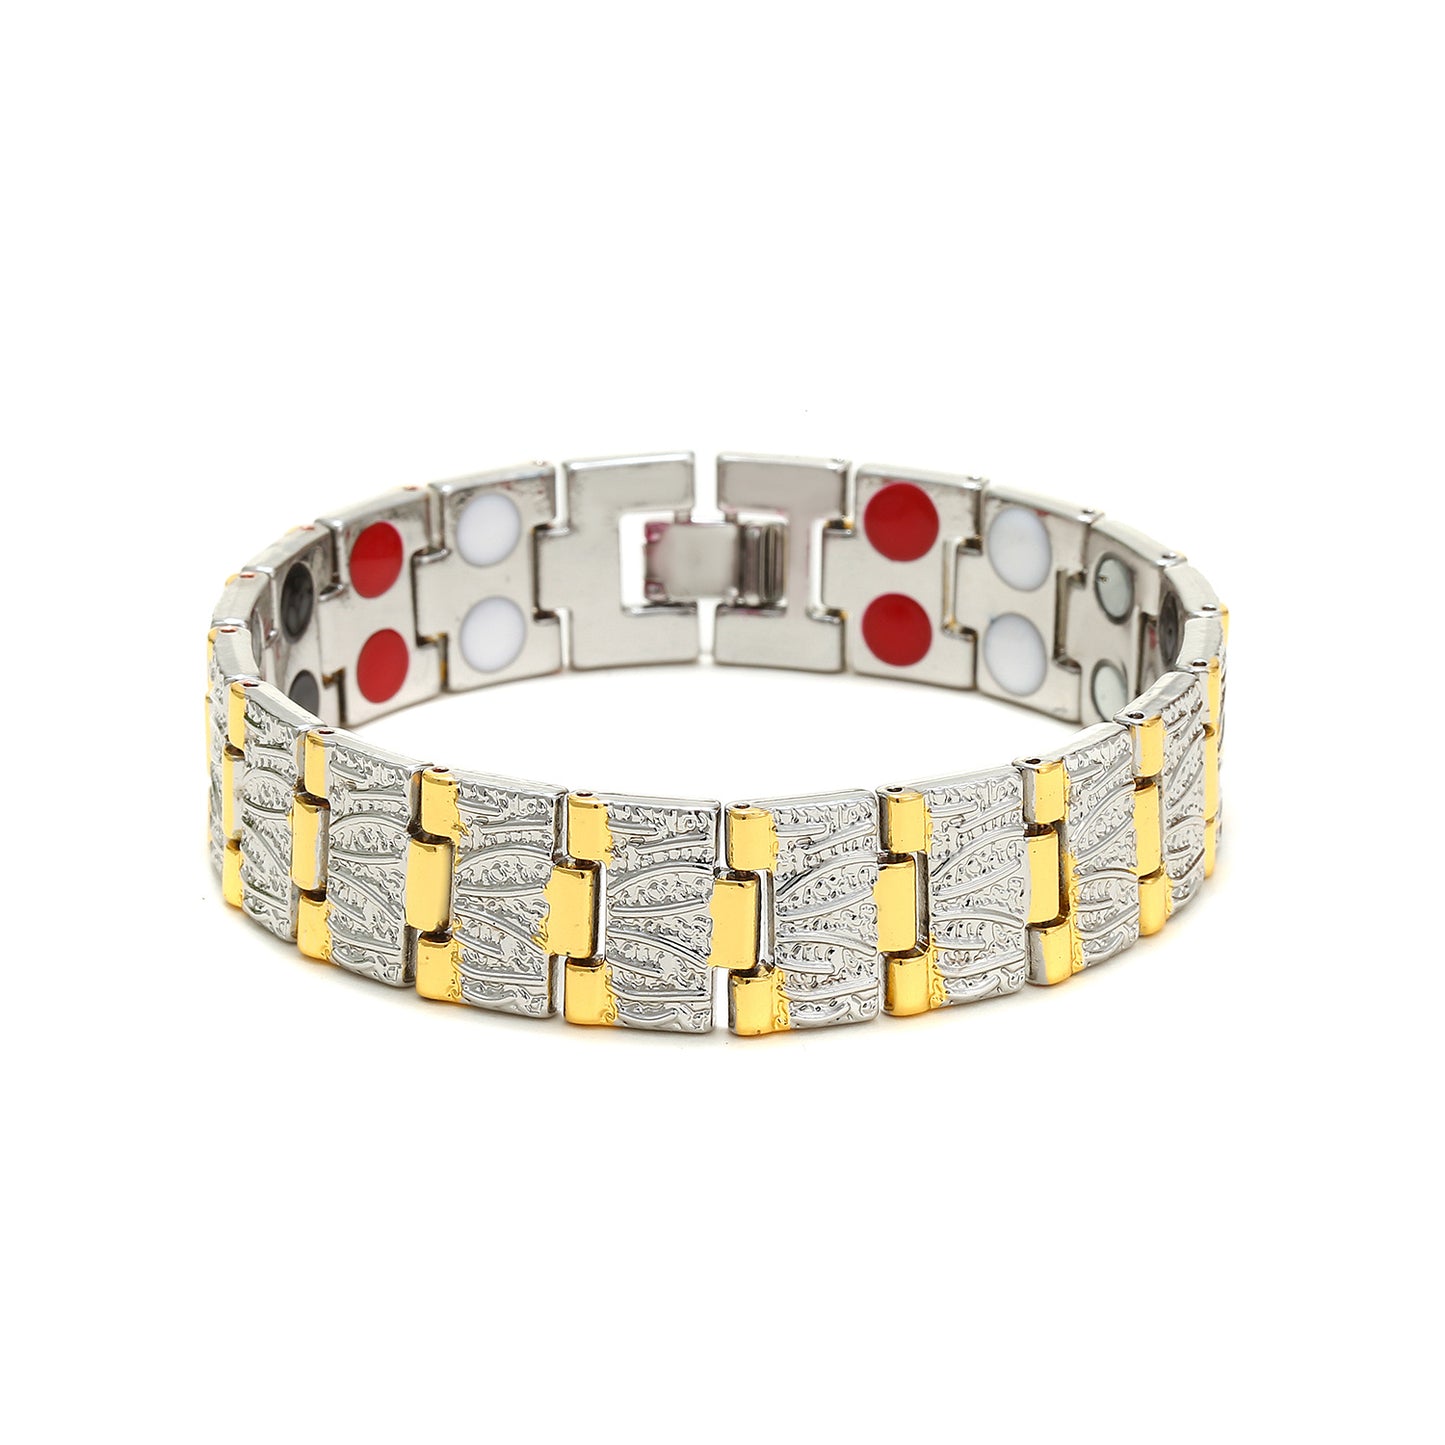 Magnetic Therapy Bracelet: Adjustable Double Row